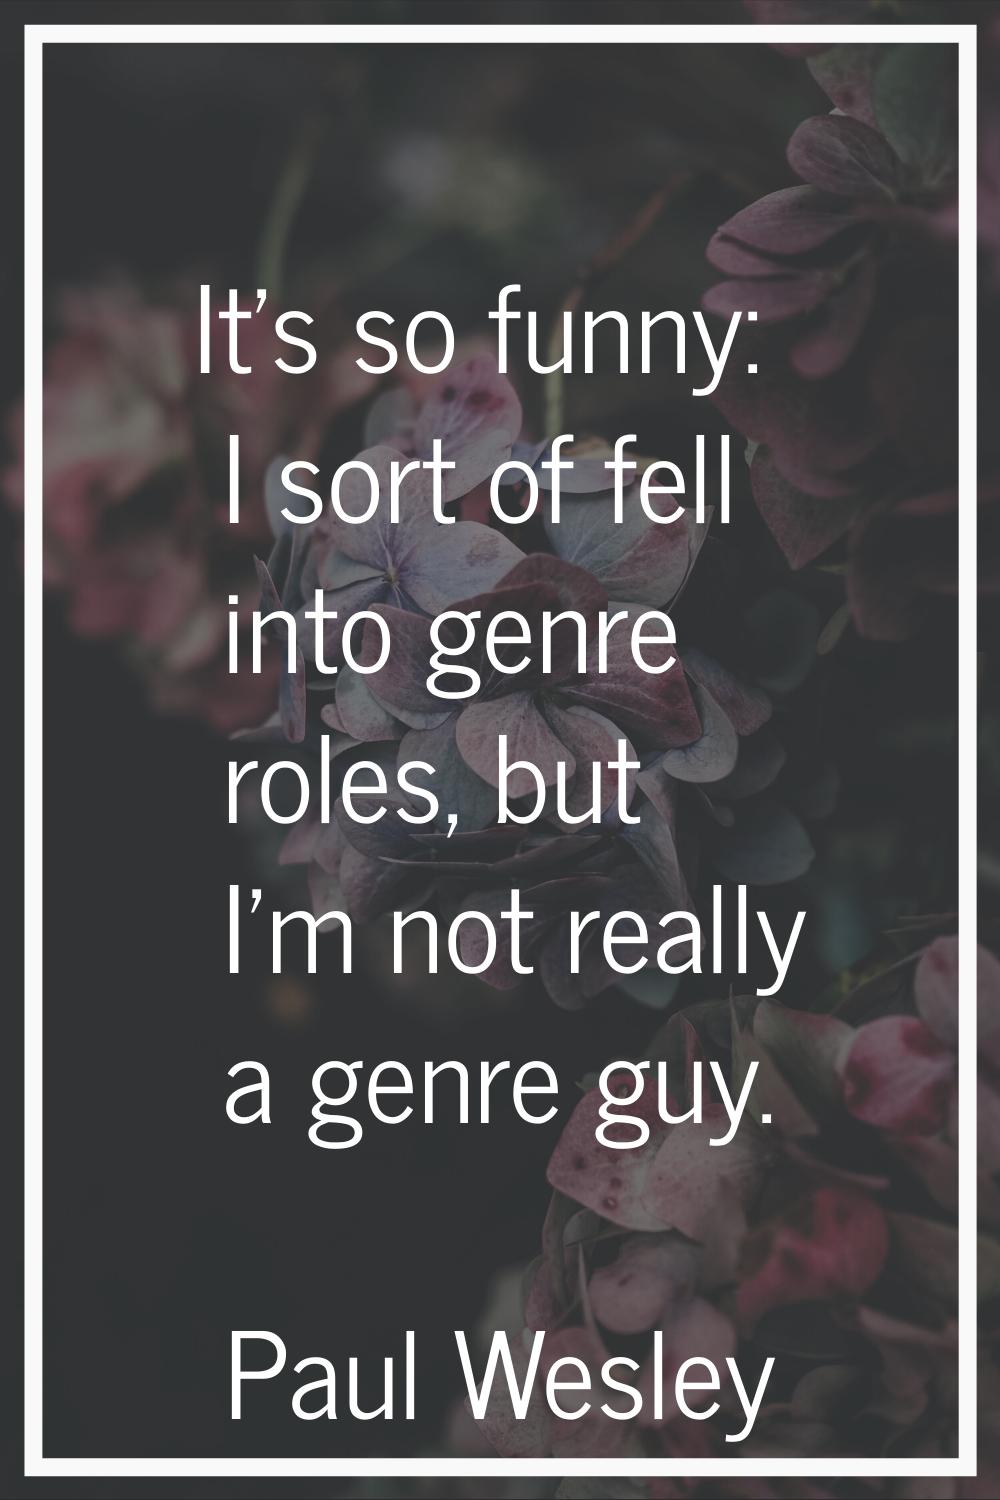 It's so funny: I sort of fell into genre roles, but I'm not really a genre guy.